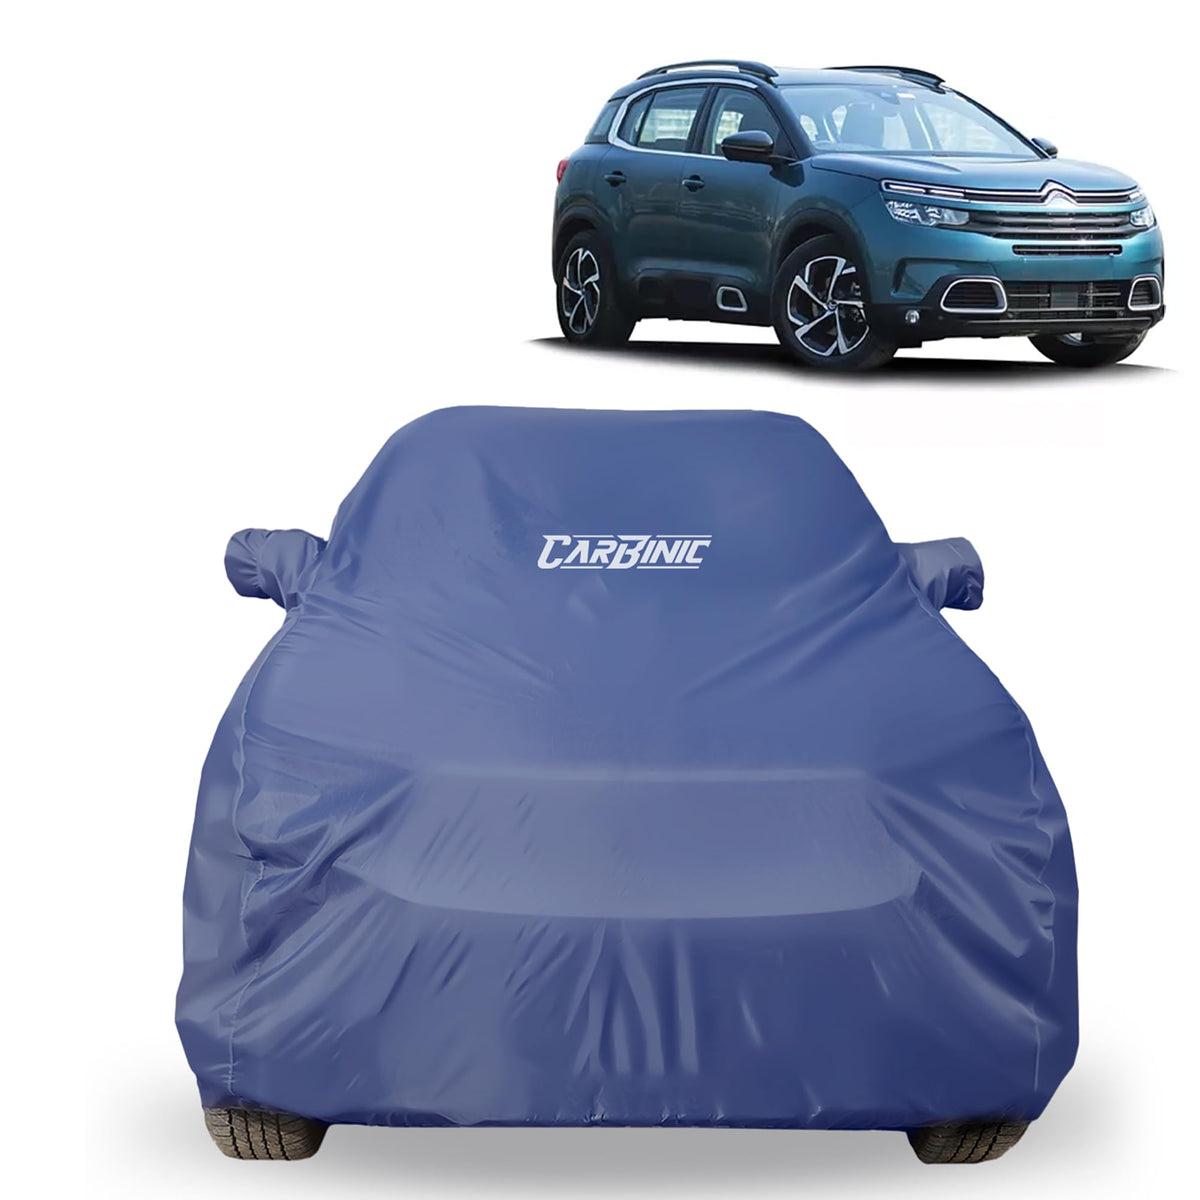 CARBINIC Car Body Cover for Skoda Kodiaq 2022 | Water Resistant, UV Protection Car Cover | Scratchproof Body Shield | All-Weather Cover | Mirror Pocket & Antenna | Car Accessories Dusk Blue